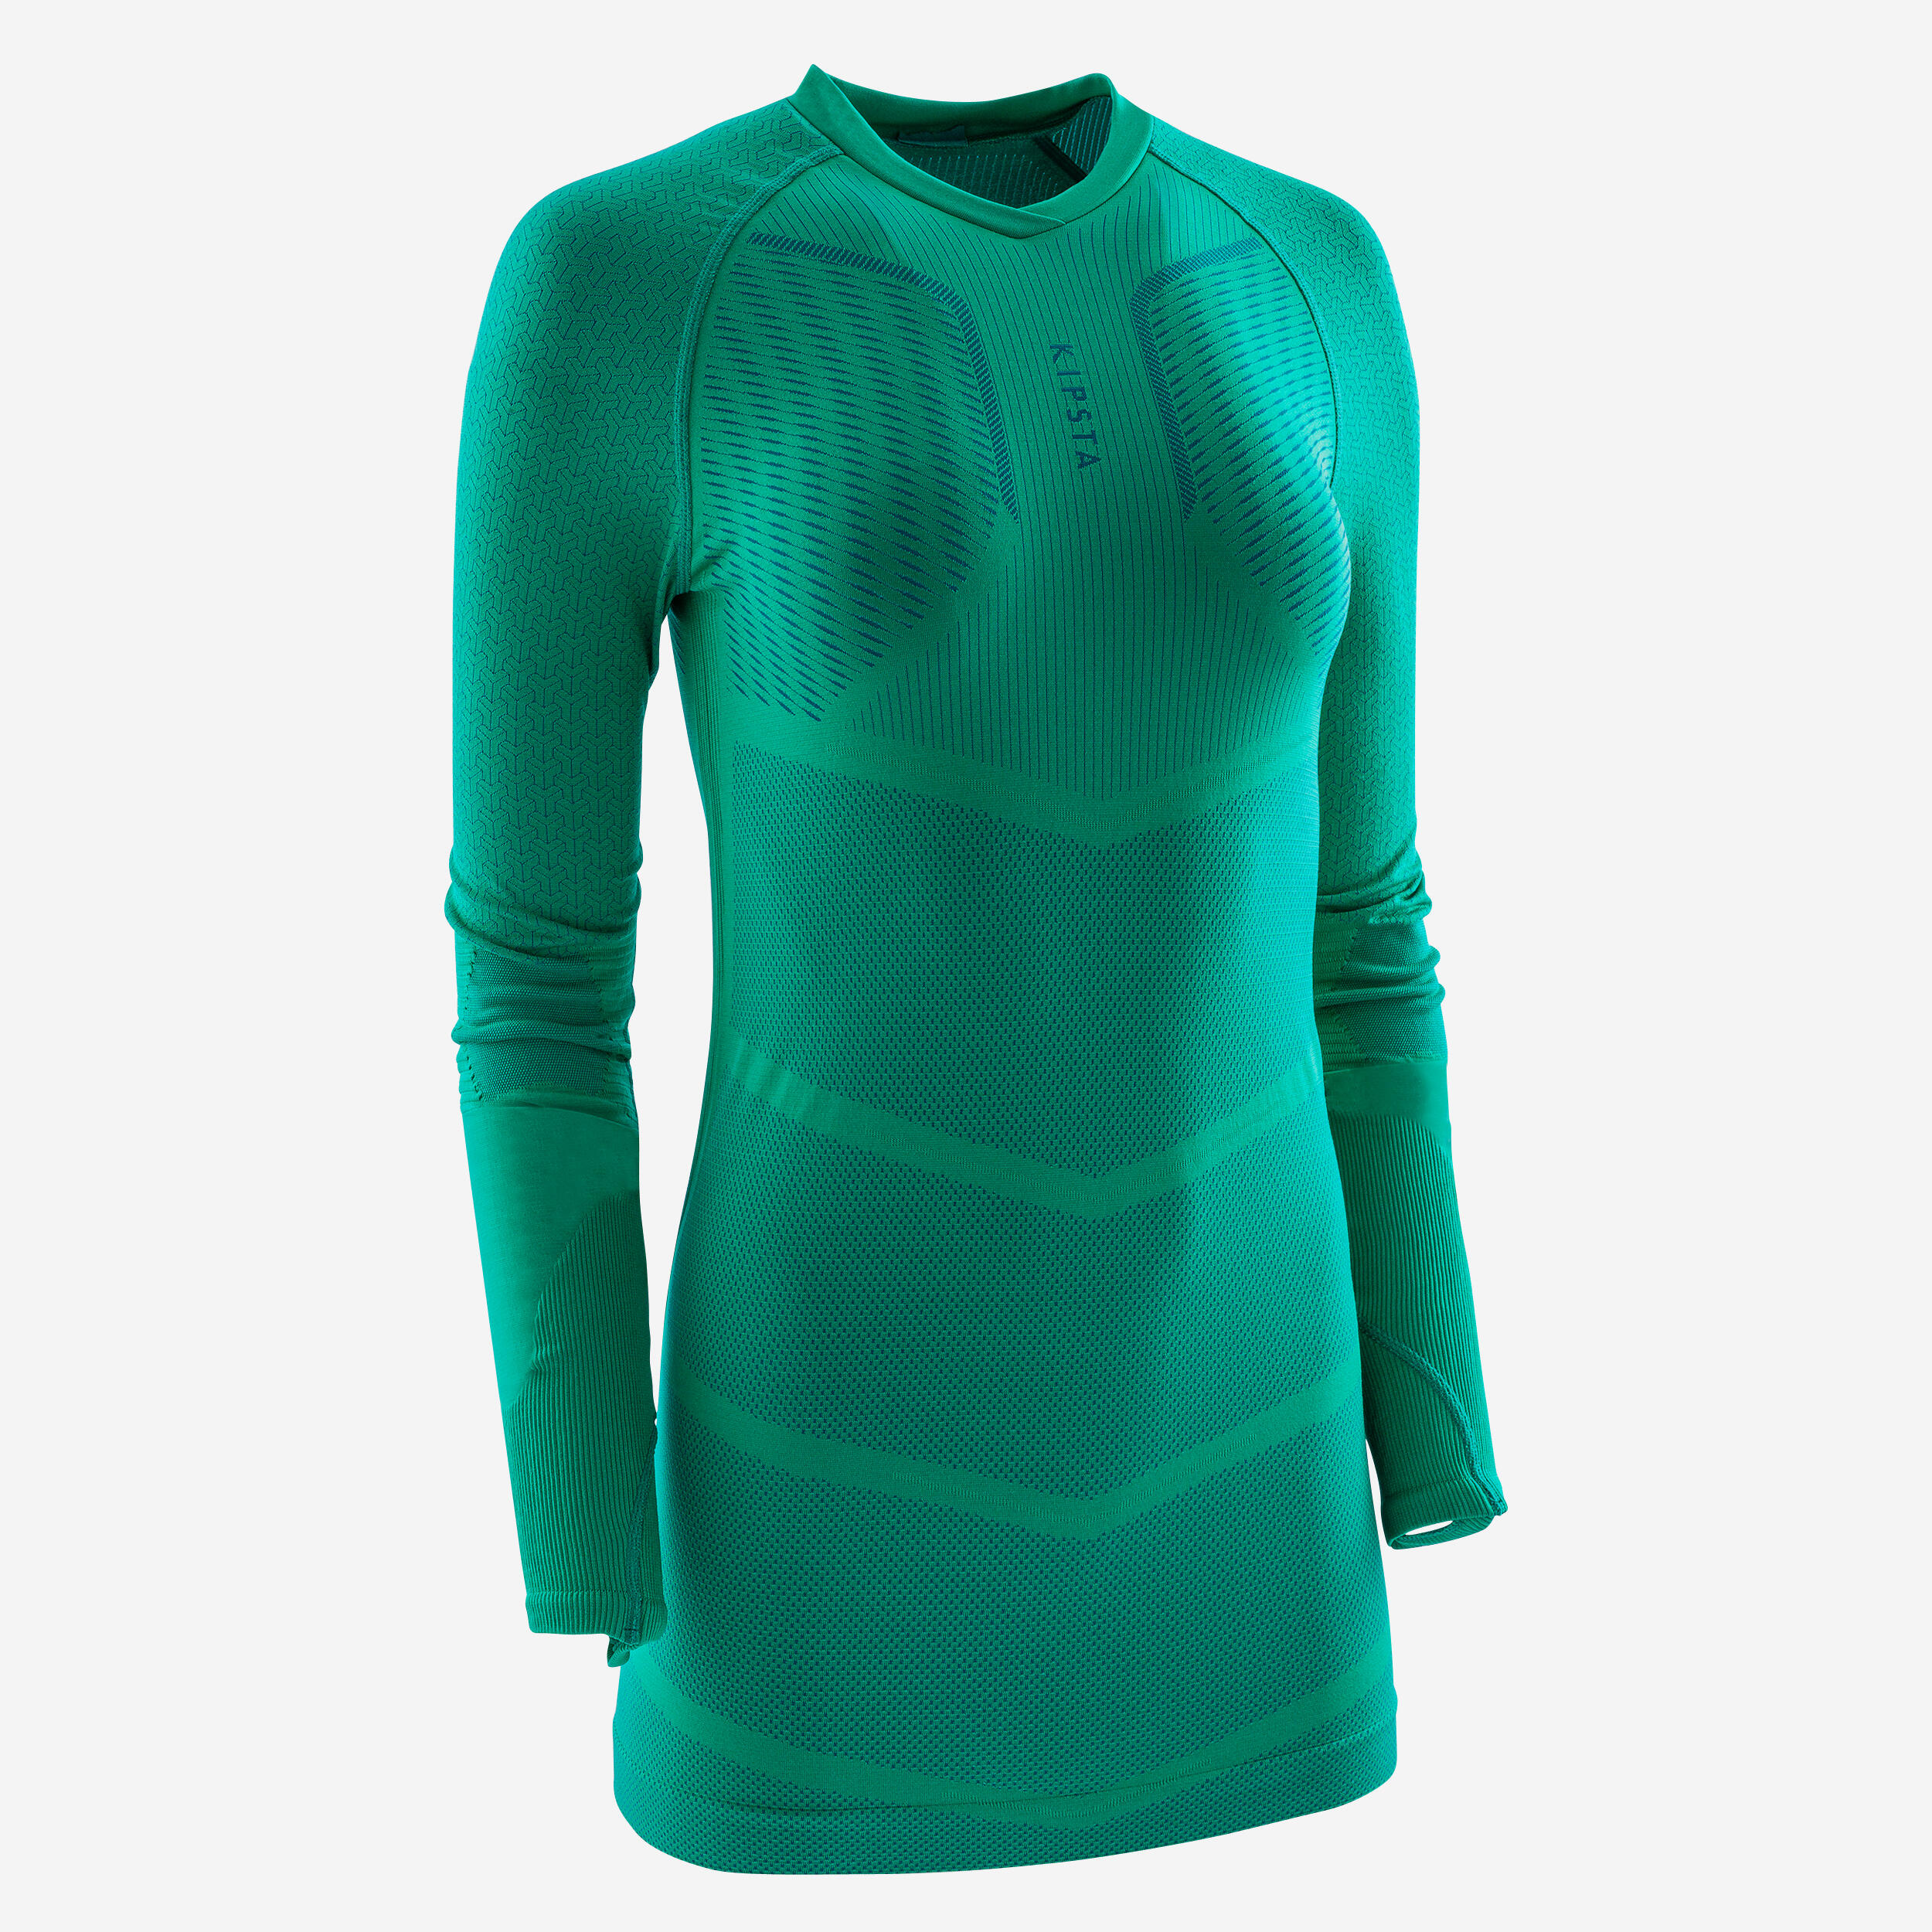 Adult Long-Sleeved Thermal Base Layer Top Keepdry 500 - Green 2/14